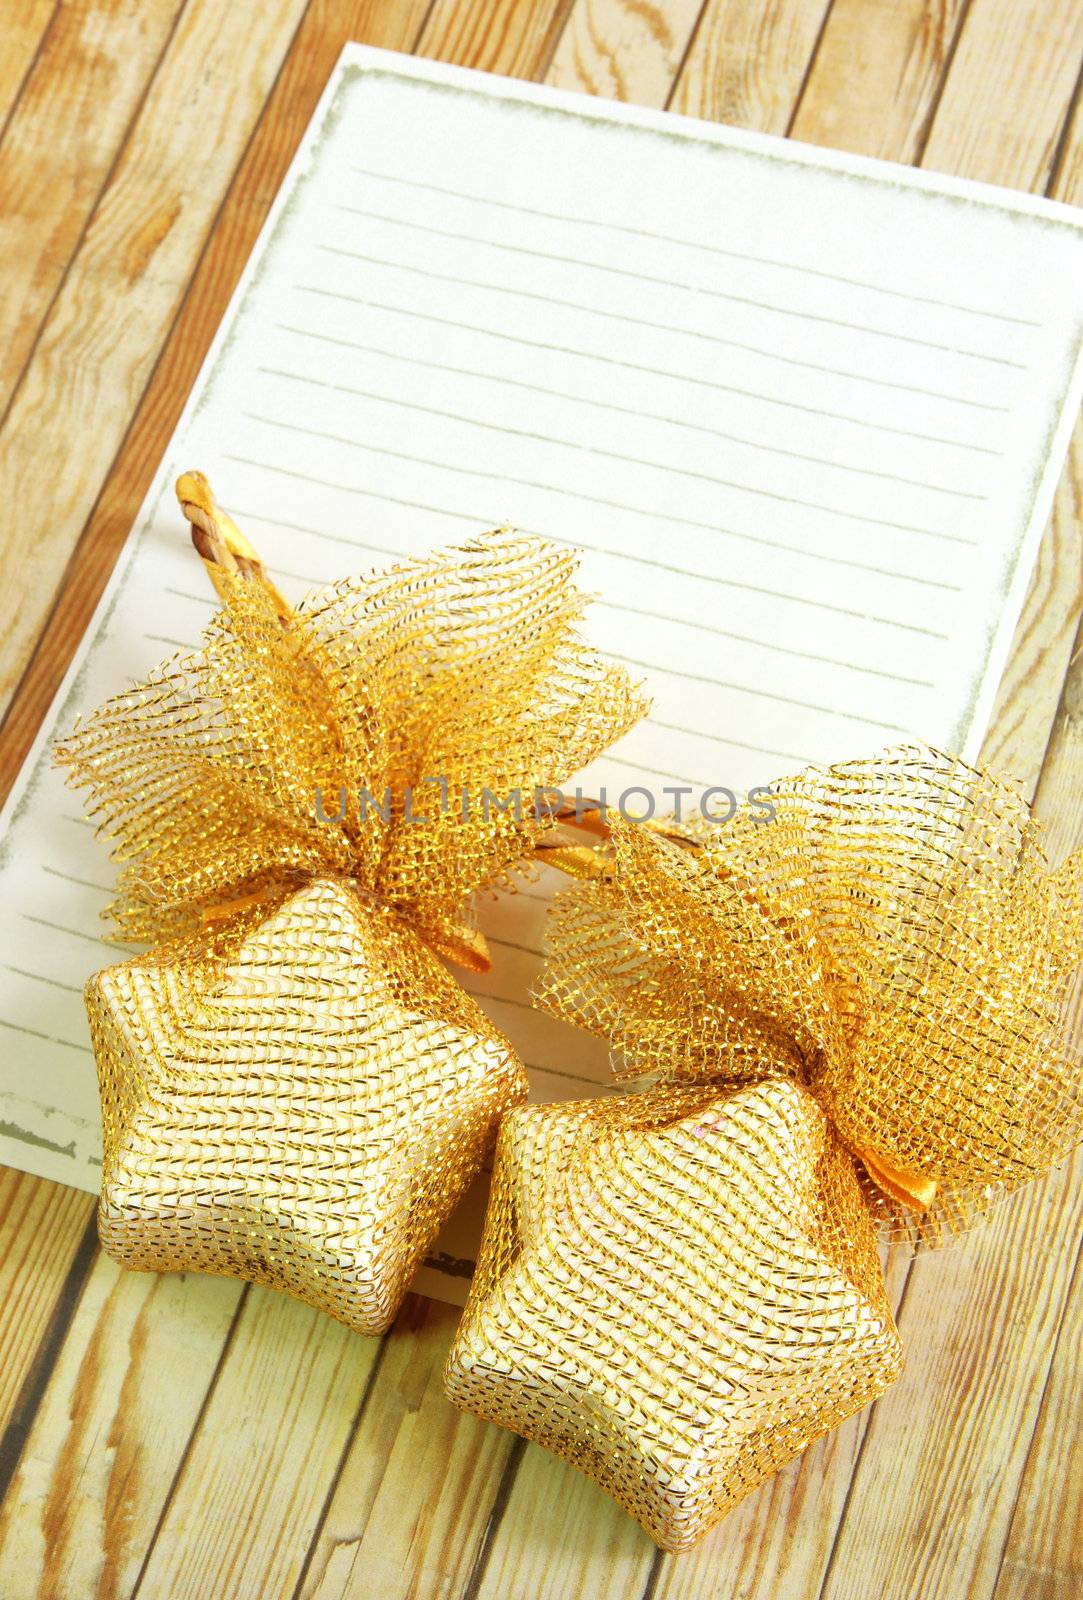  Christmas decoration with blank notebook over wooden background by nuchylee